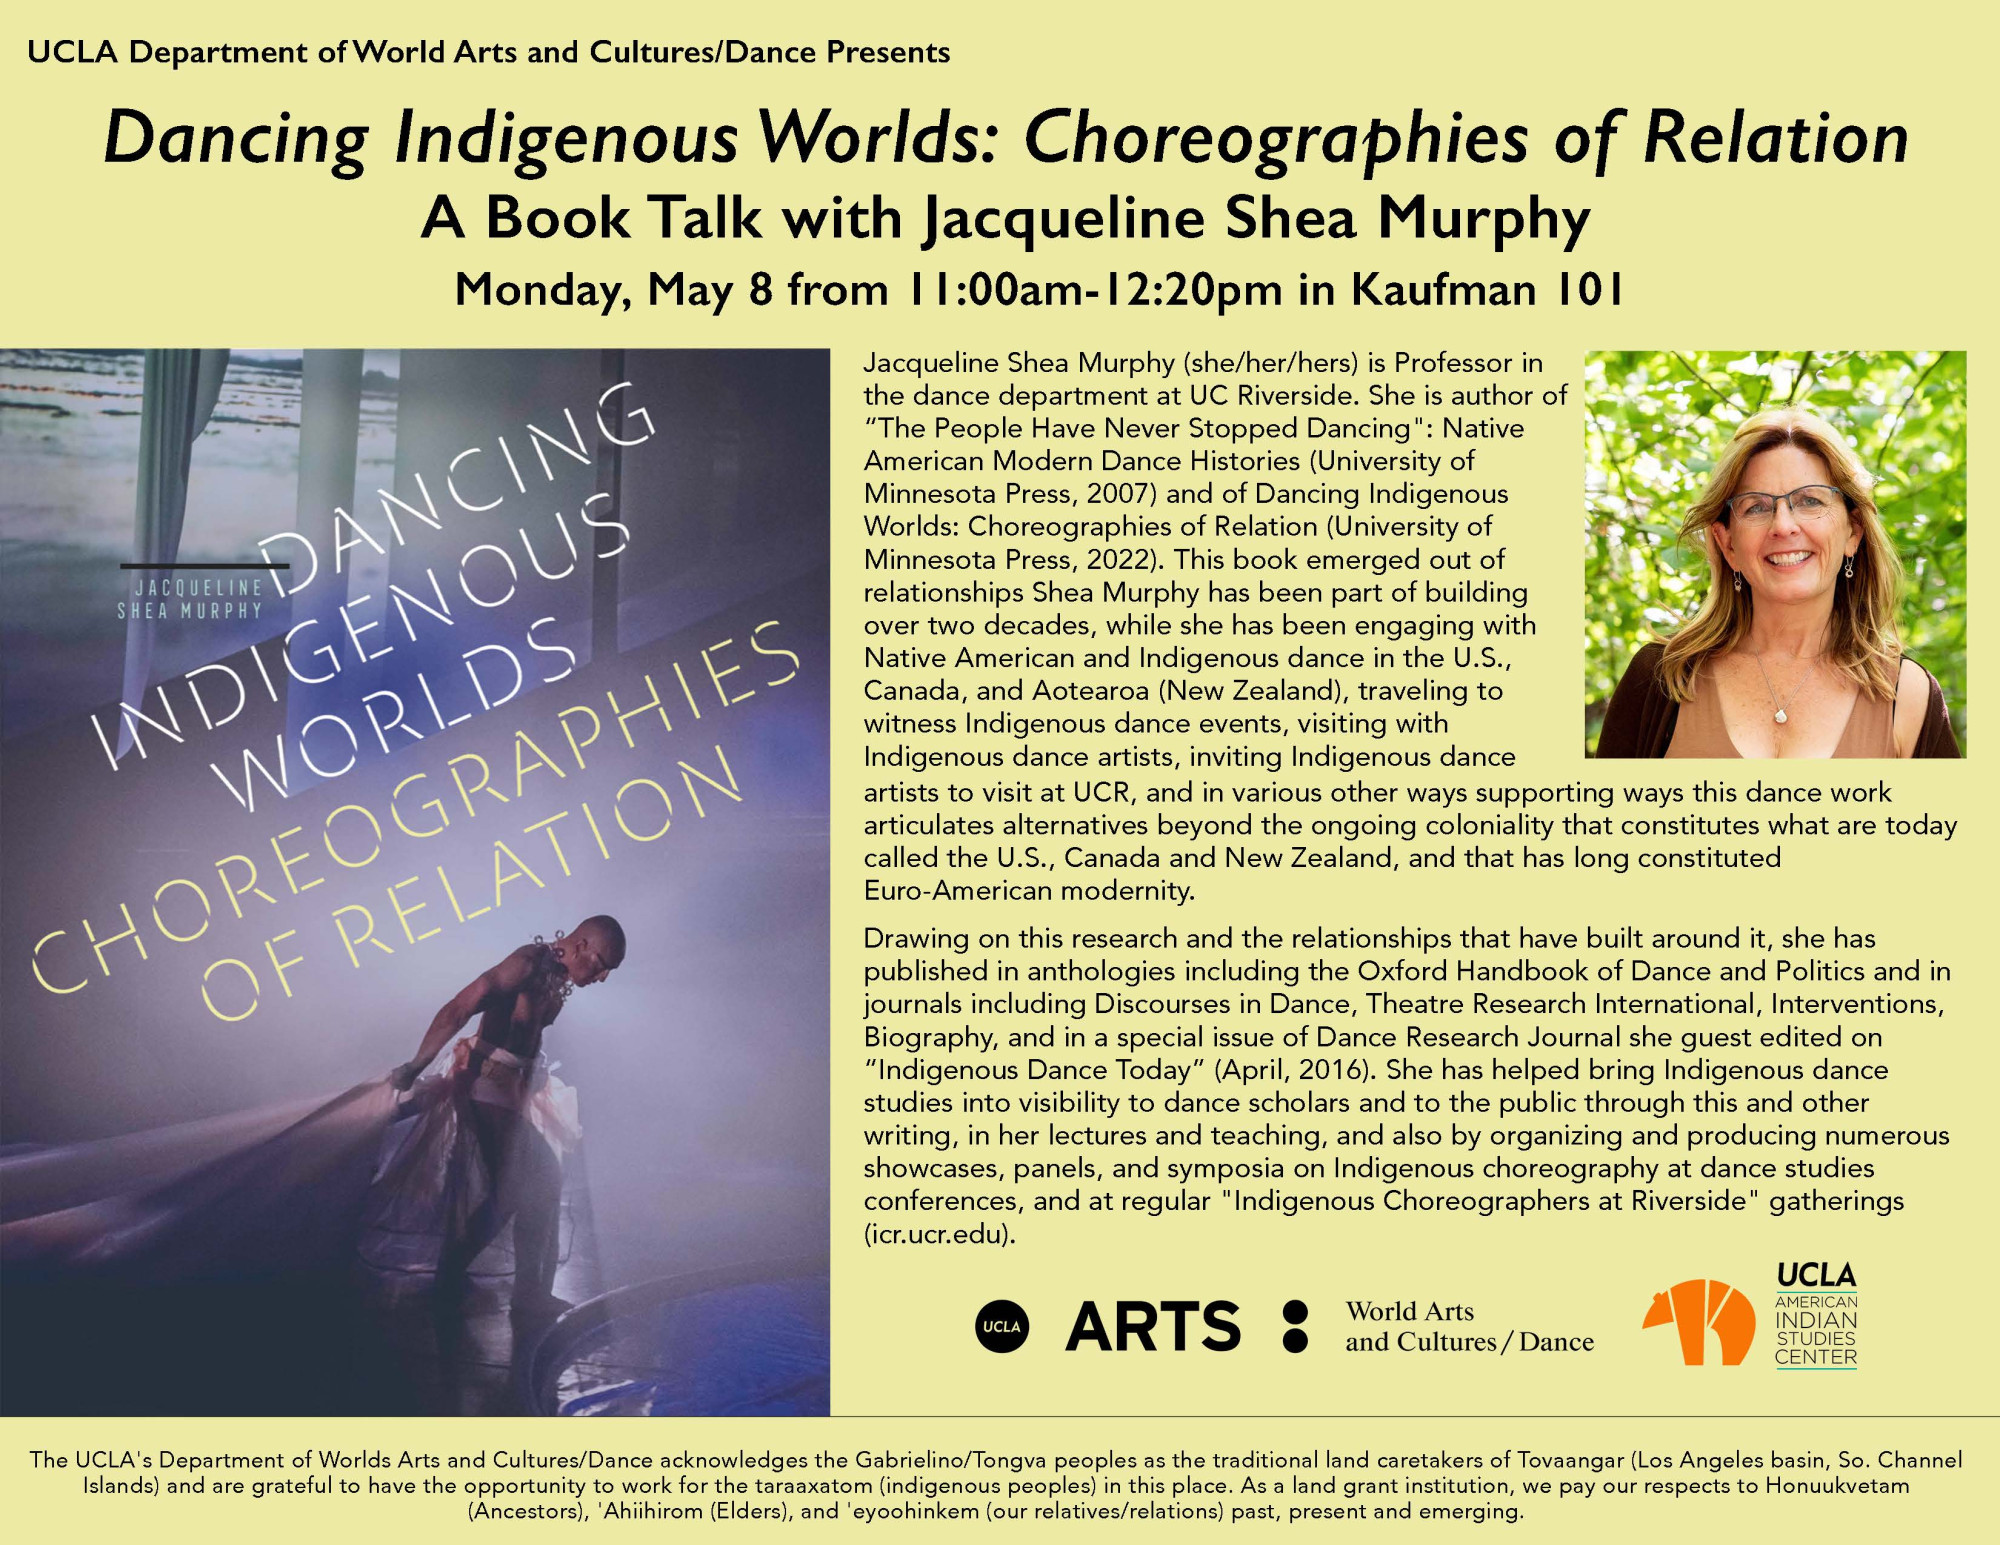 Dancing Indigenous Worlds: Choreographies of Relation A Book Talk with Jacqueline Shea Murphy